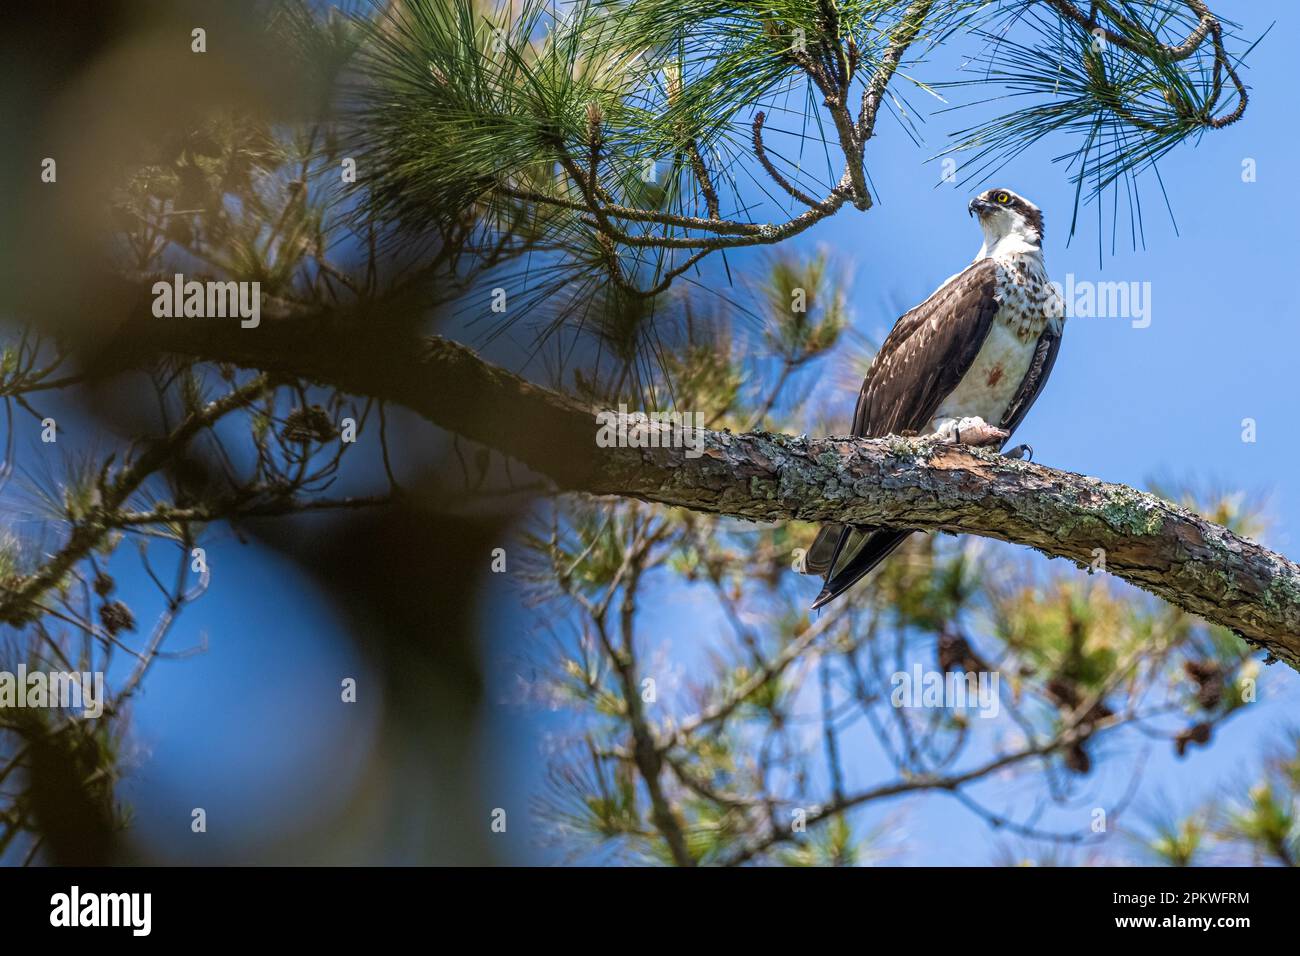 Osprey (Pandion haliaetus) clutching a recently caught fish at Sawgrass in Ponte Vedra Beach, Florida. (USA) Stock Photo